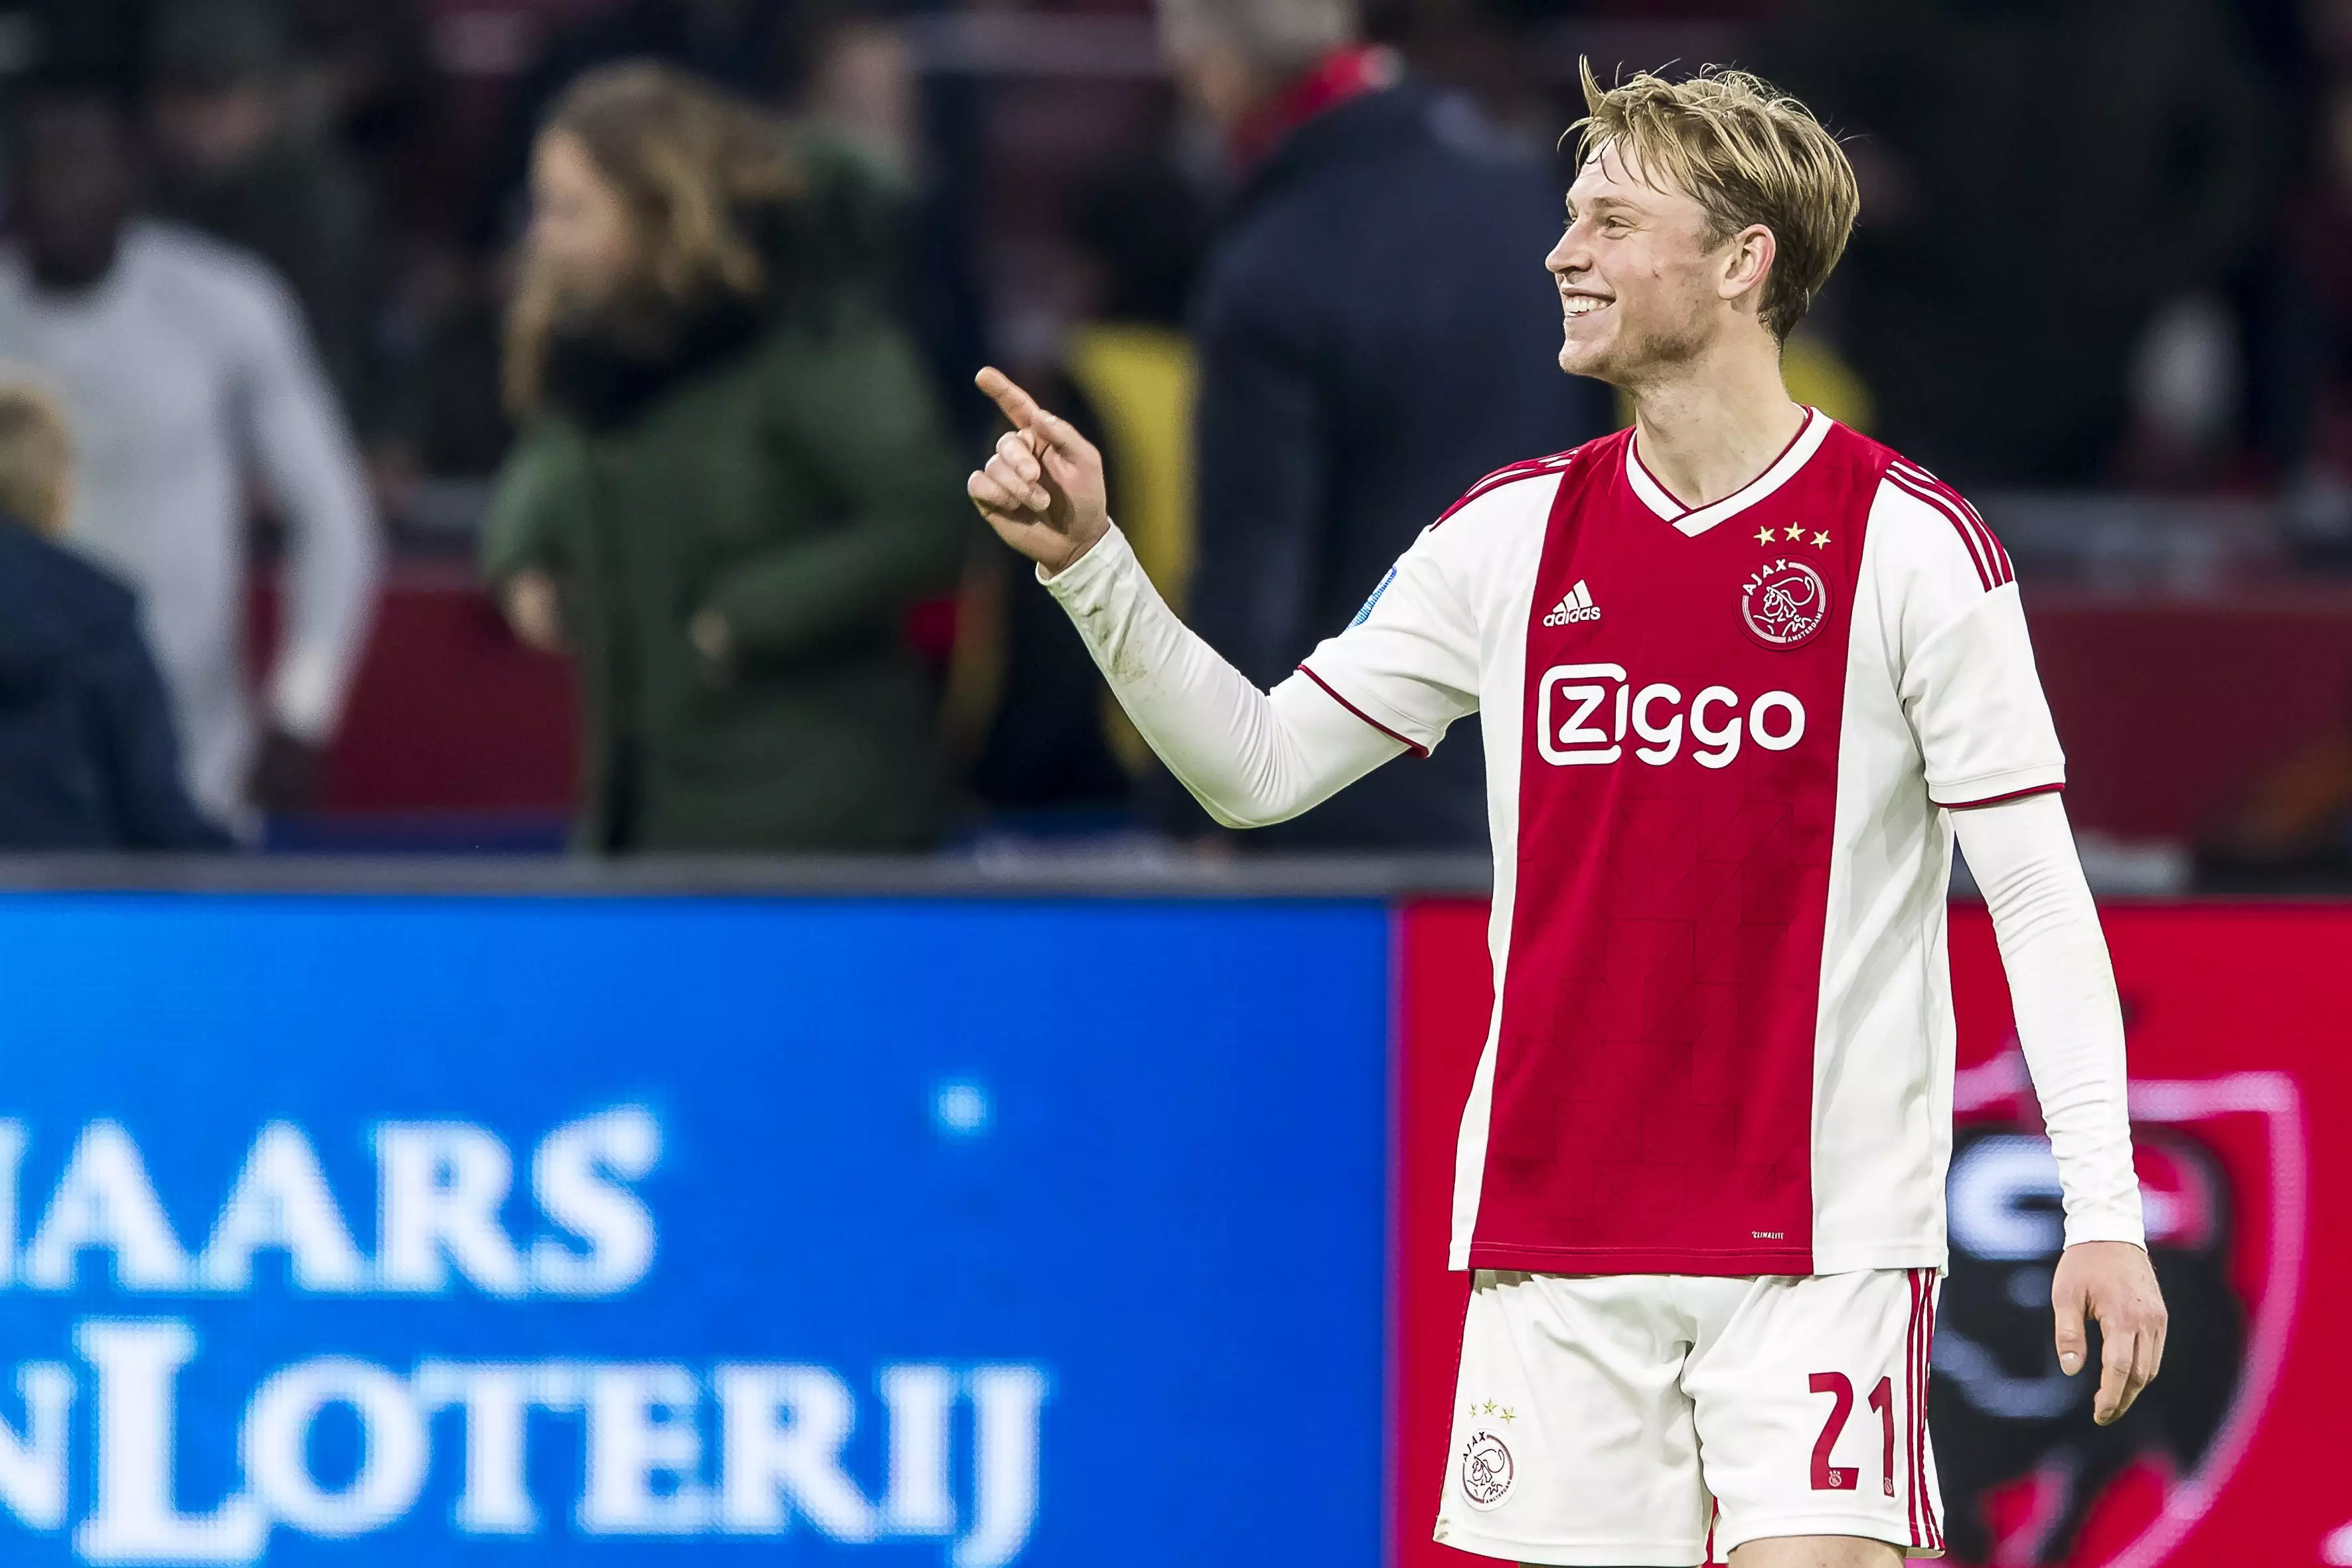 De Jong has impressed for Ajax and Netherlands. Image: PA Images